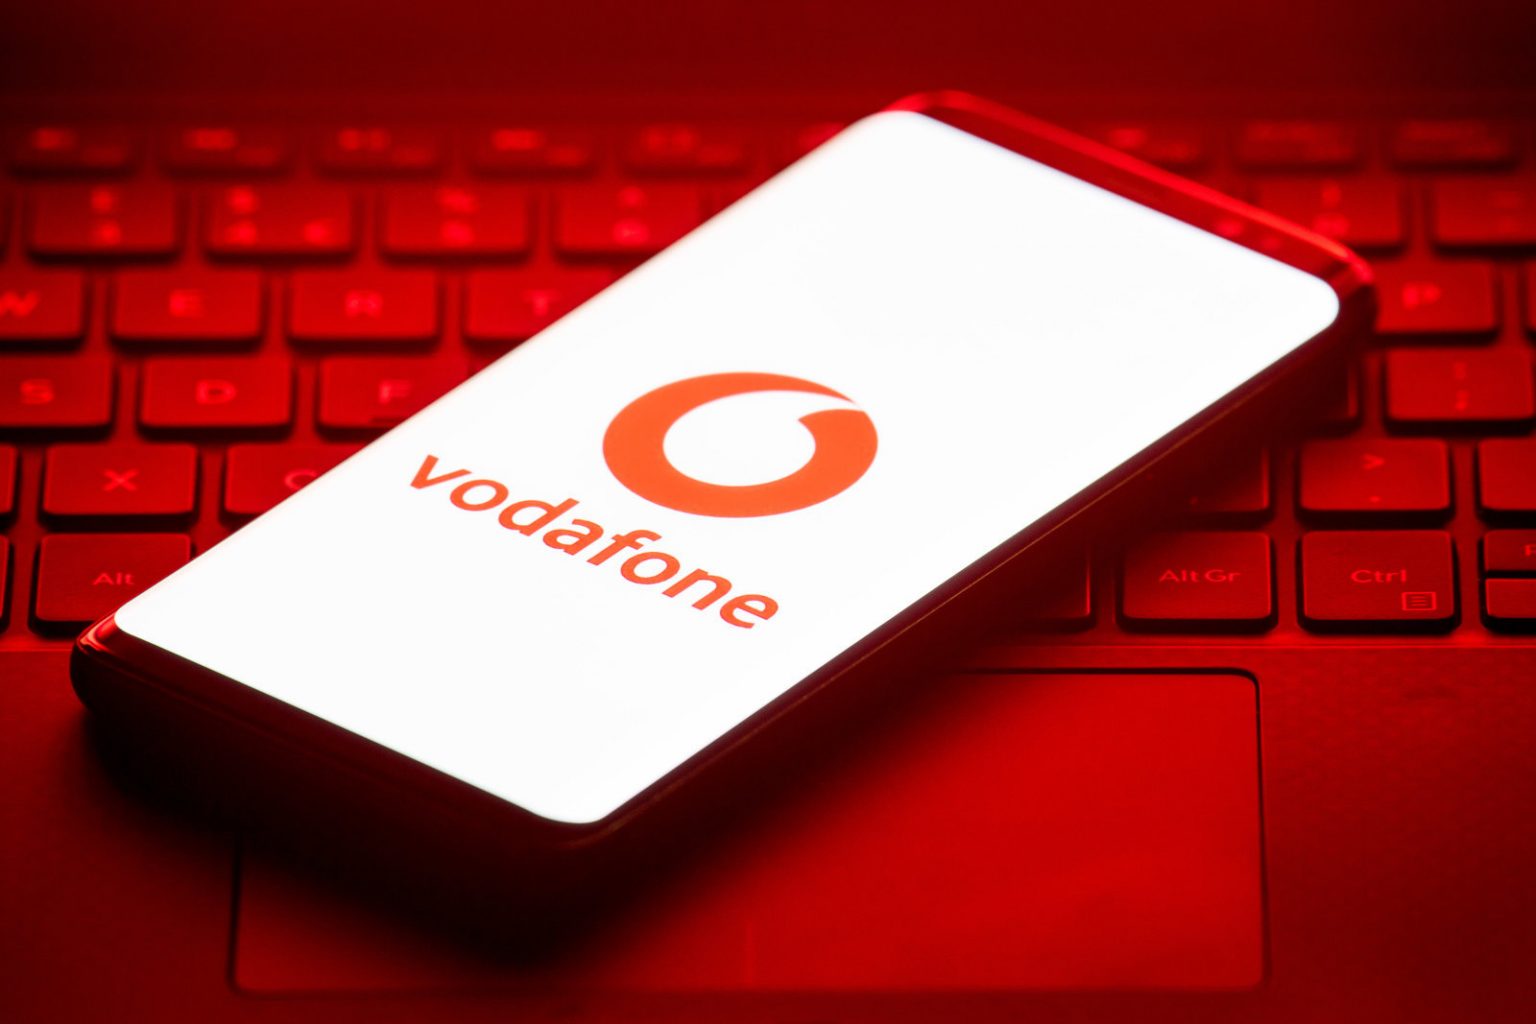 2021 Vodafone Data Check, get Internet Settings, Activate 2G/3G Plans ...